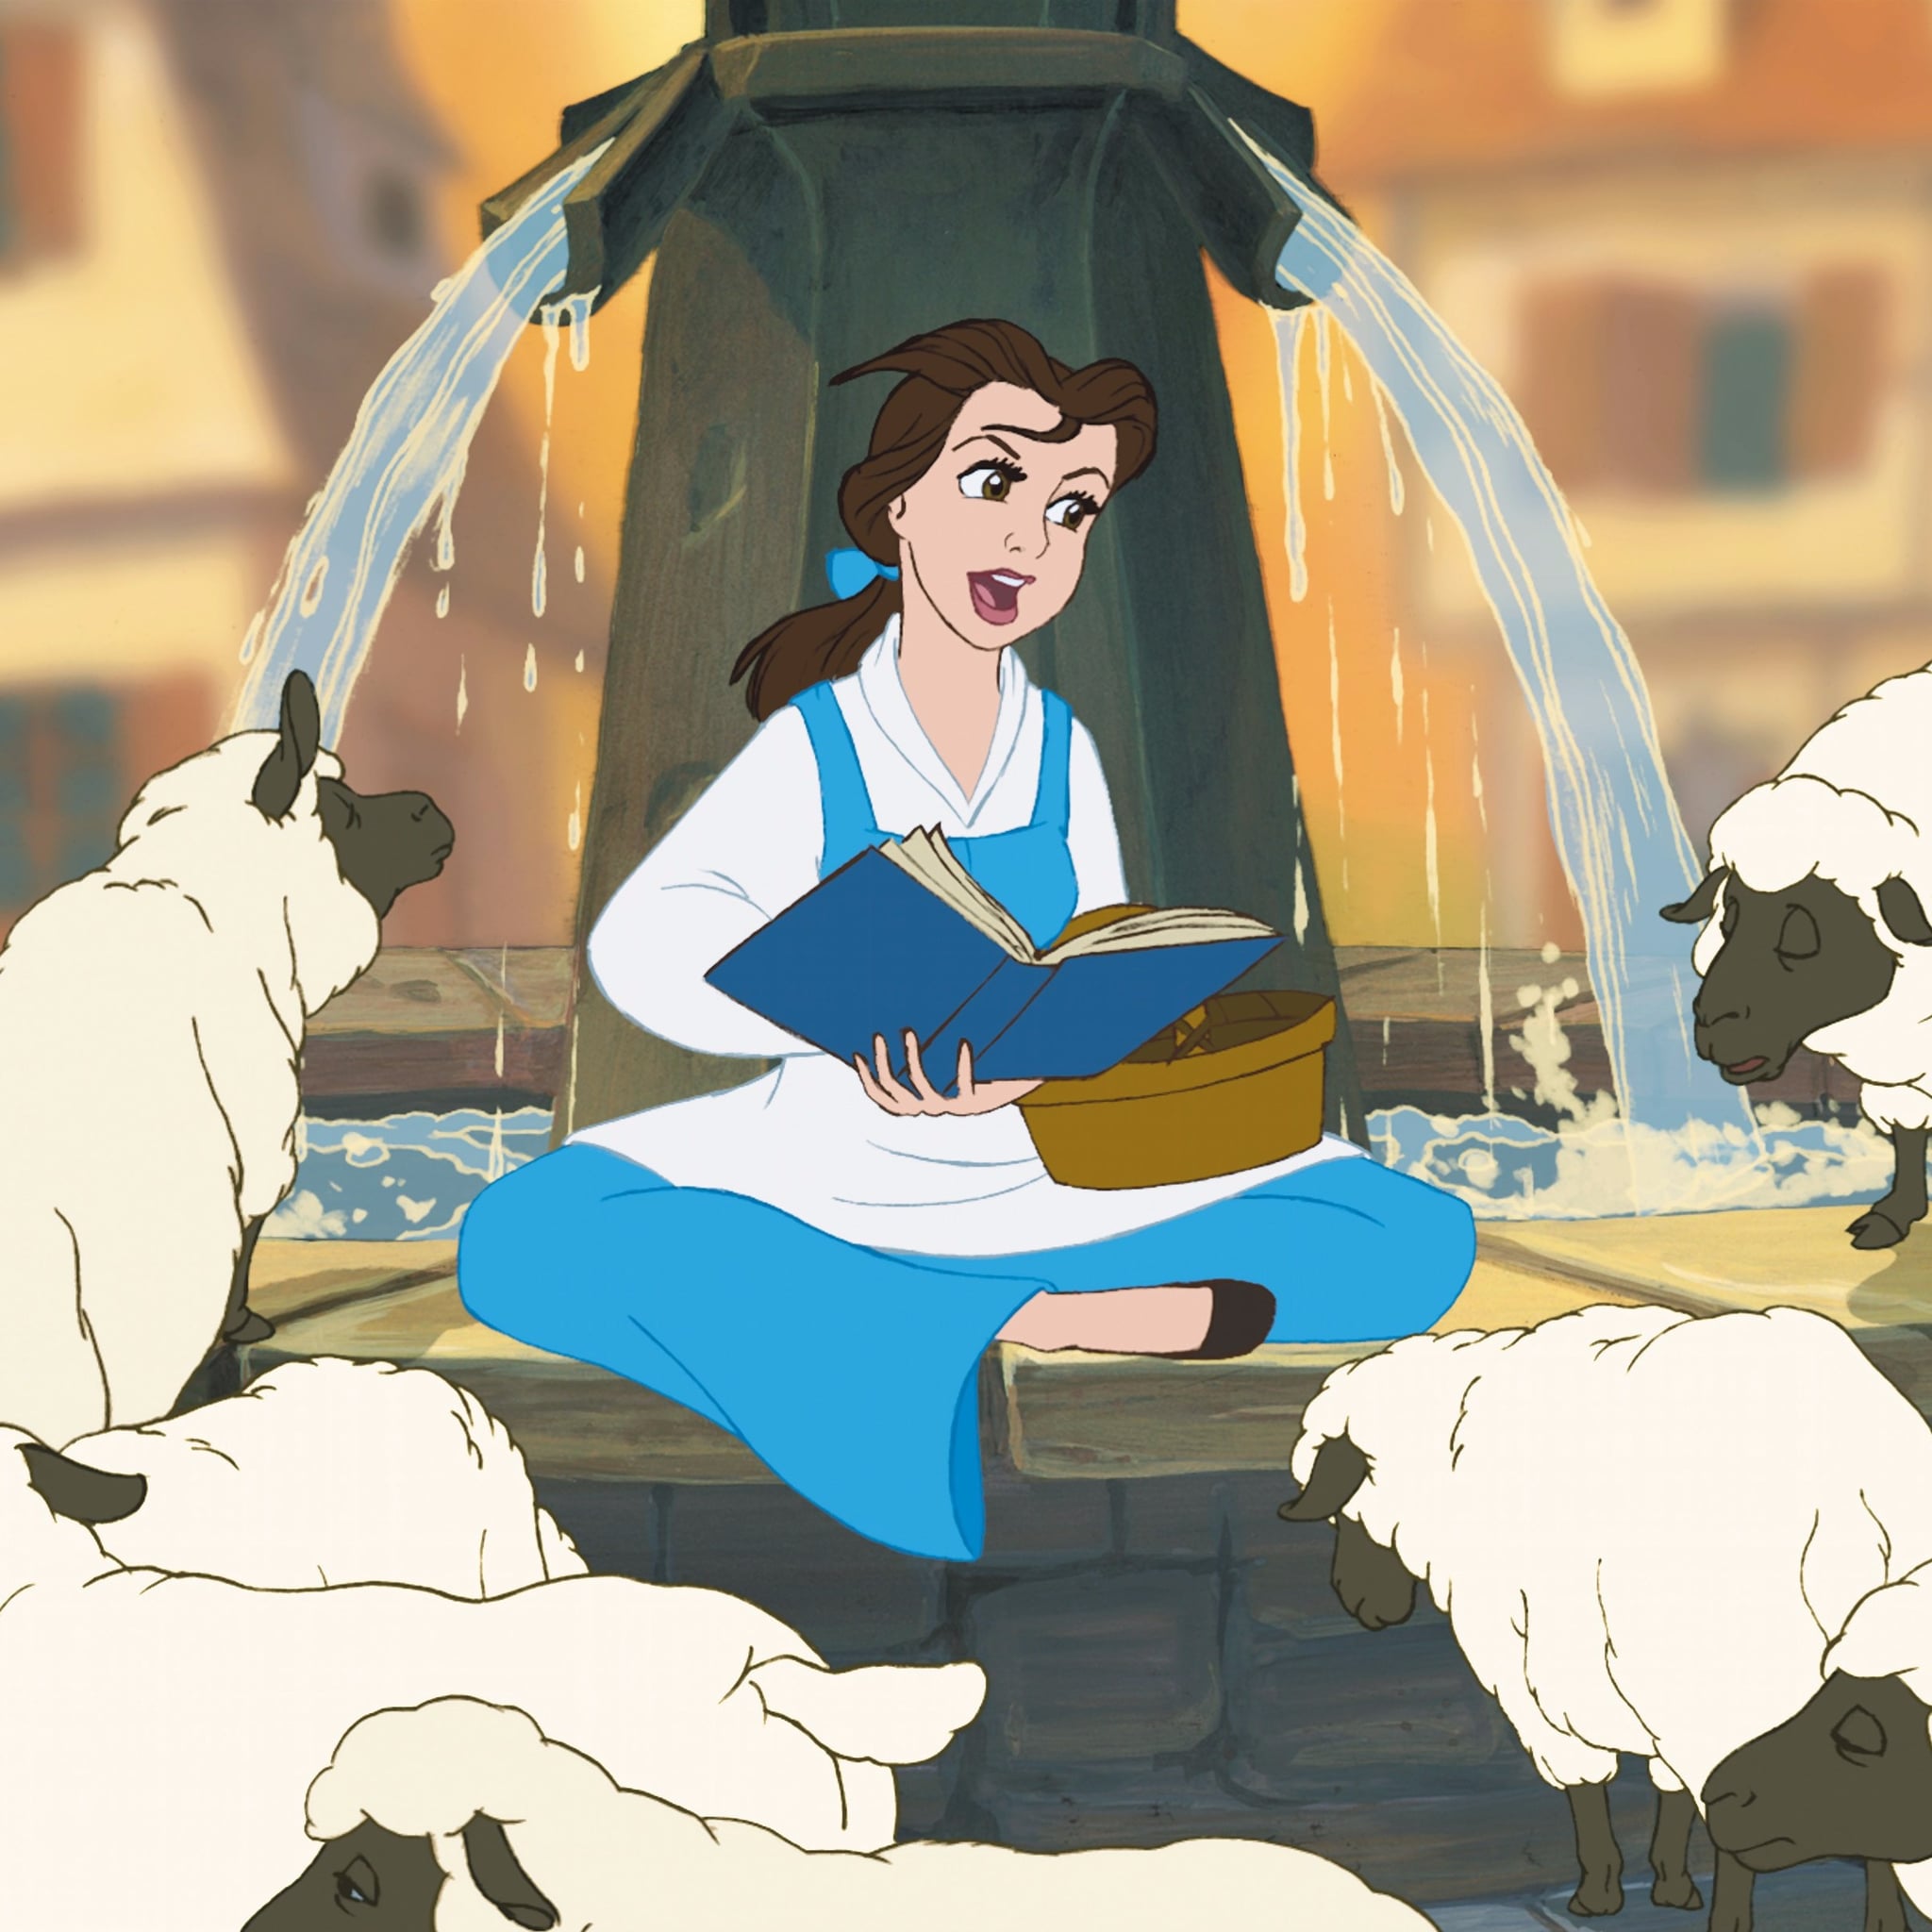 Belle reads from a book to sheep in front of a fountain.